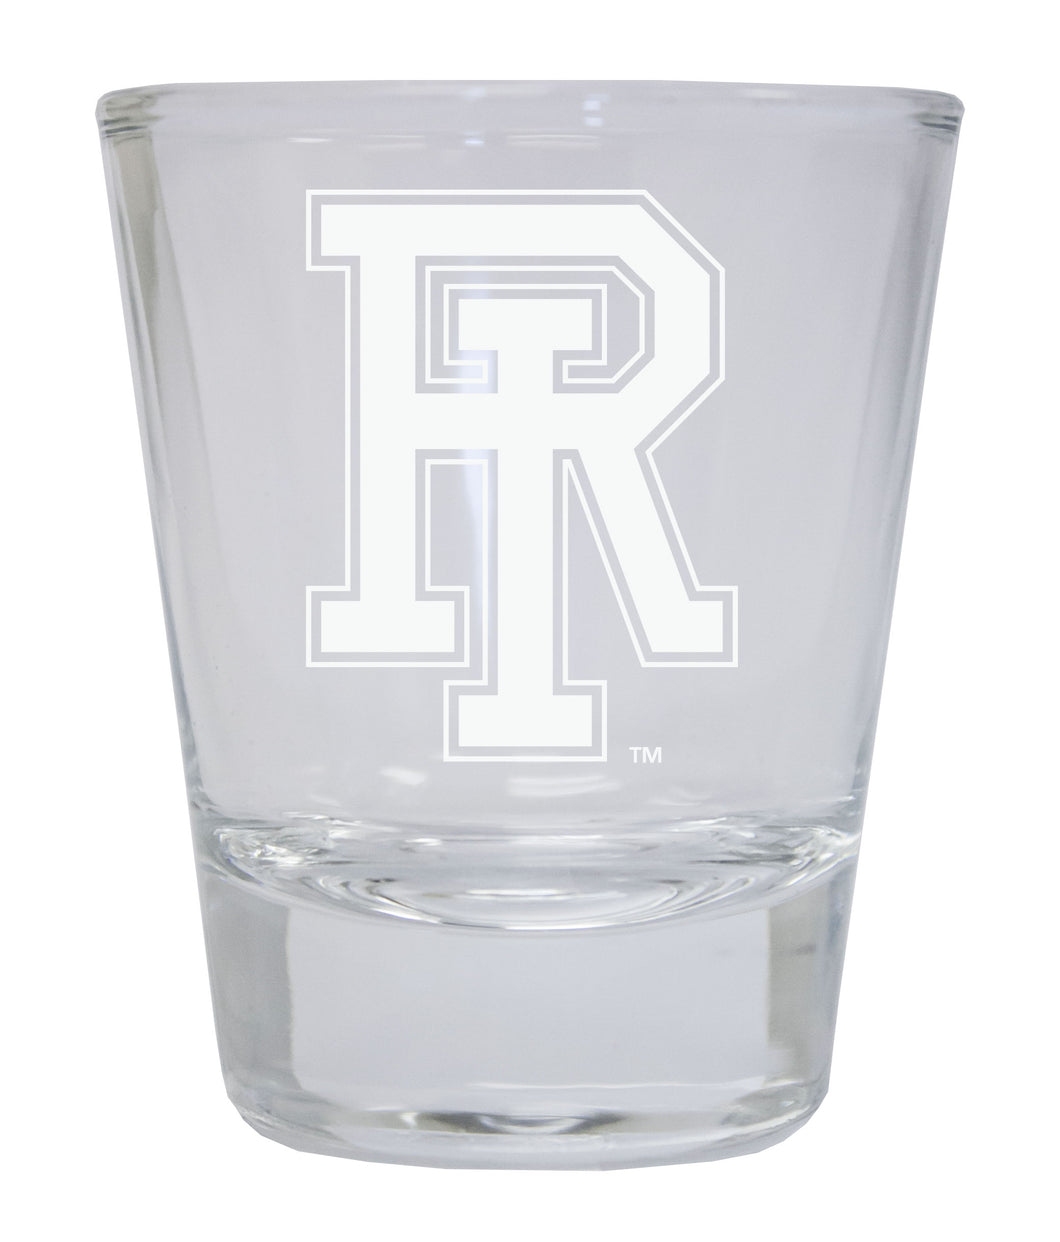 Rhode Island University Etched Round Shot Glass Officially Licensed Collegiate Product